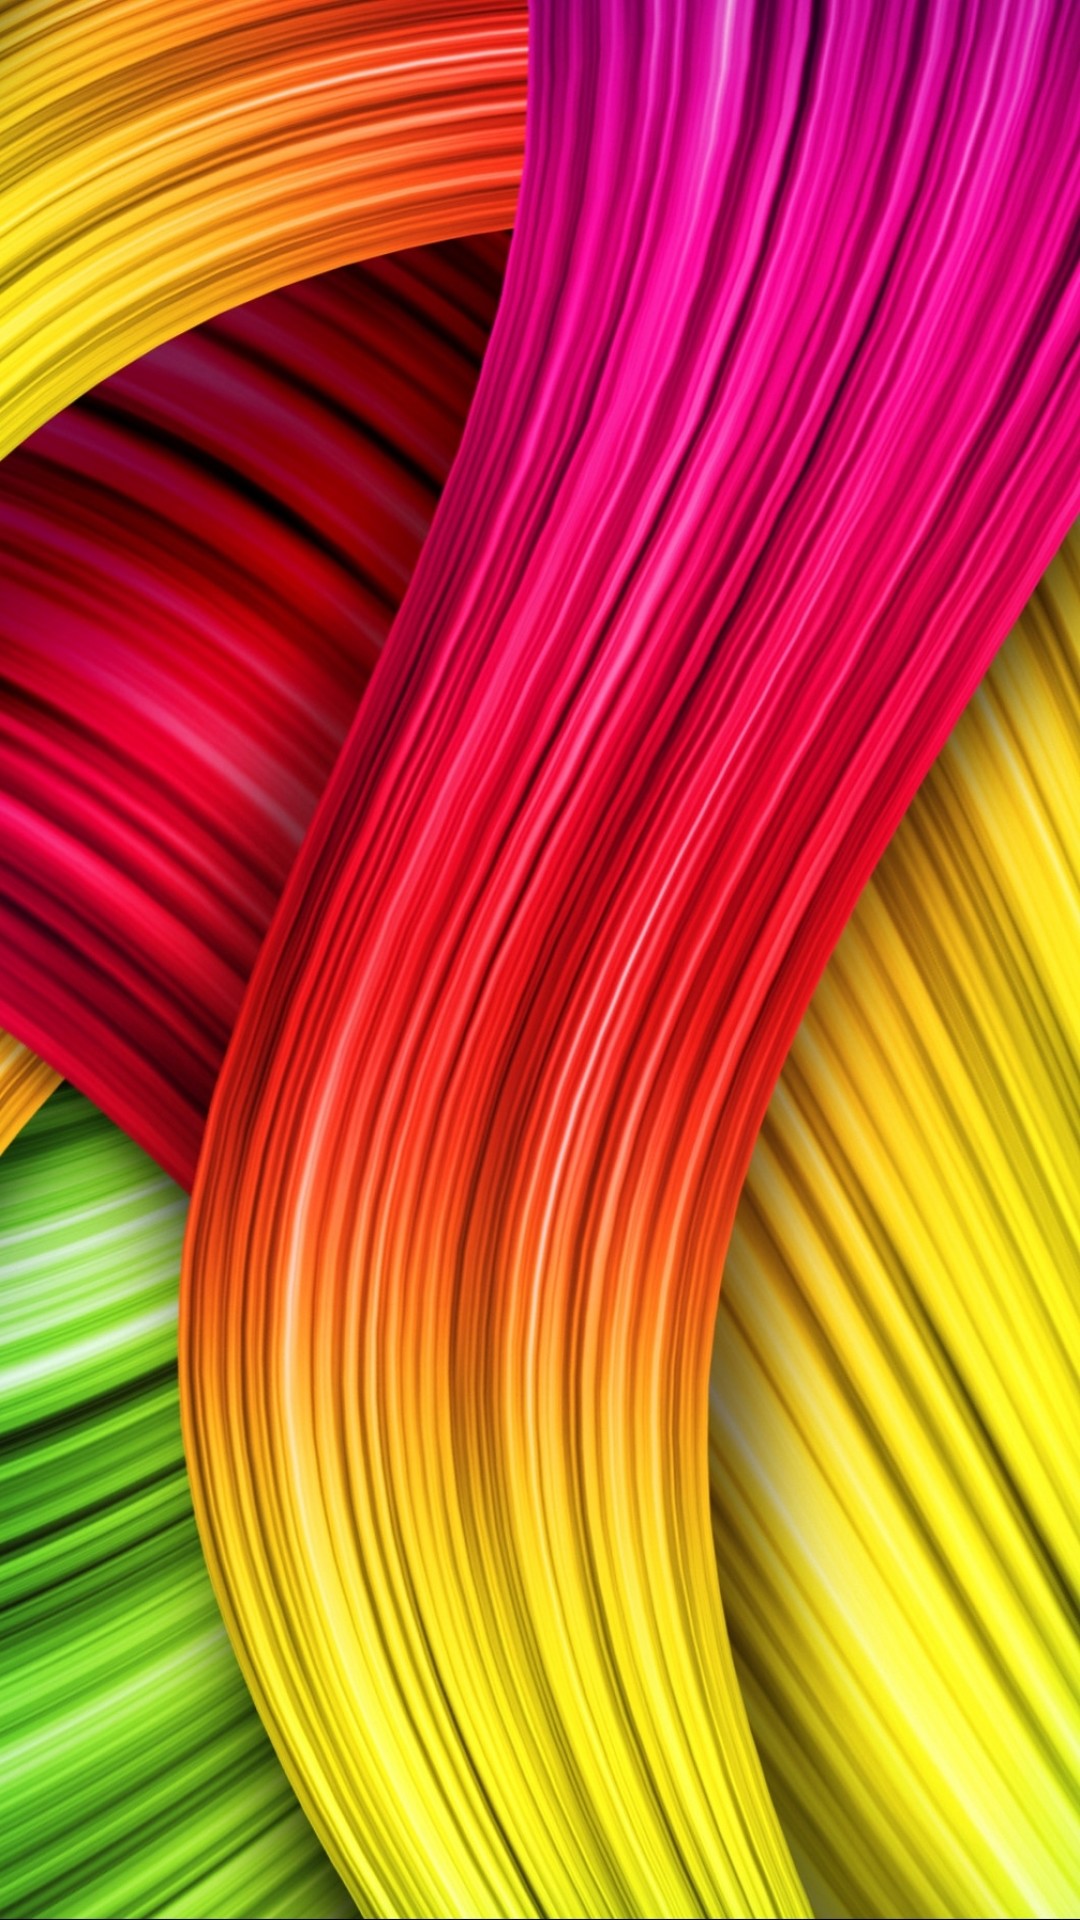 Colorful Abstract For iPhone New Mobile HD Wallpaper Colours Mixed Together